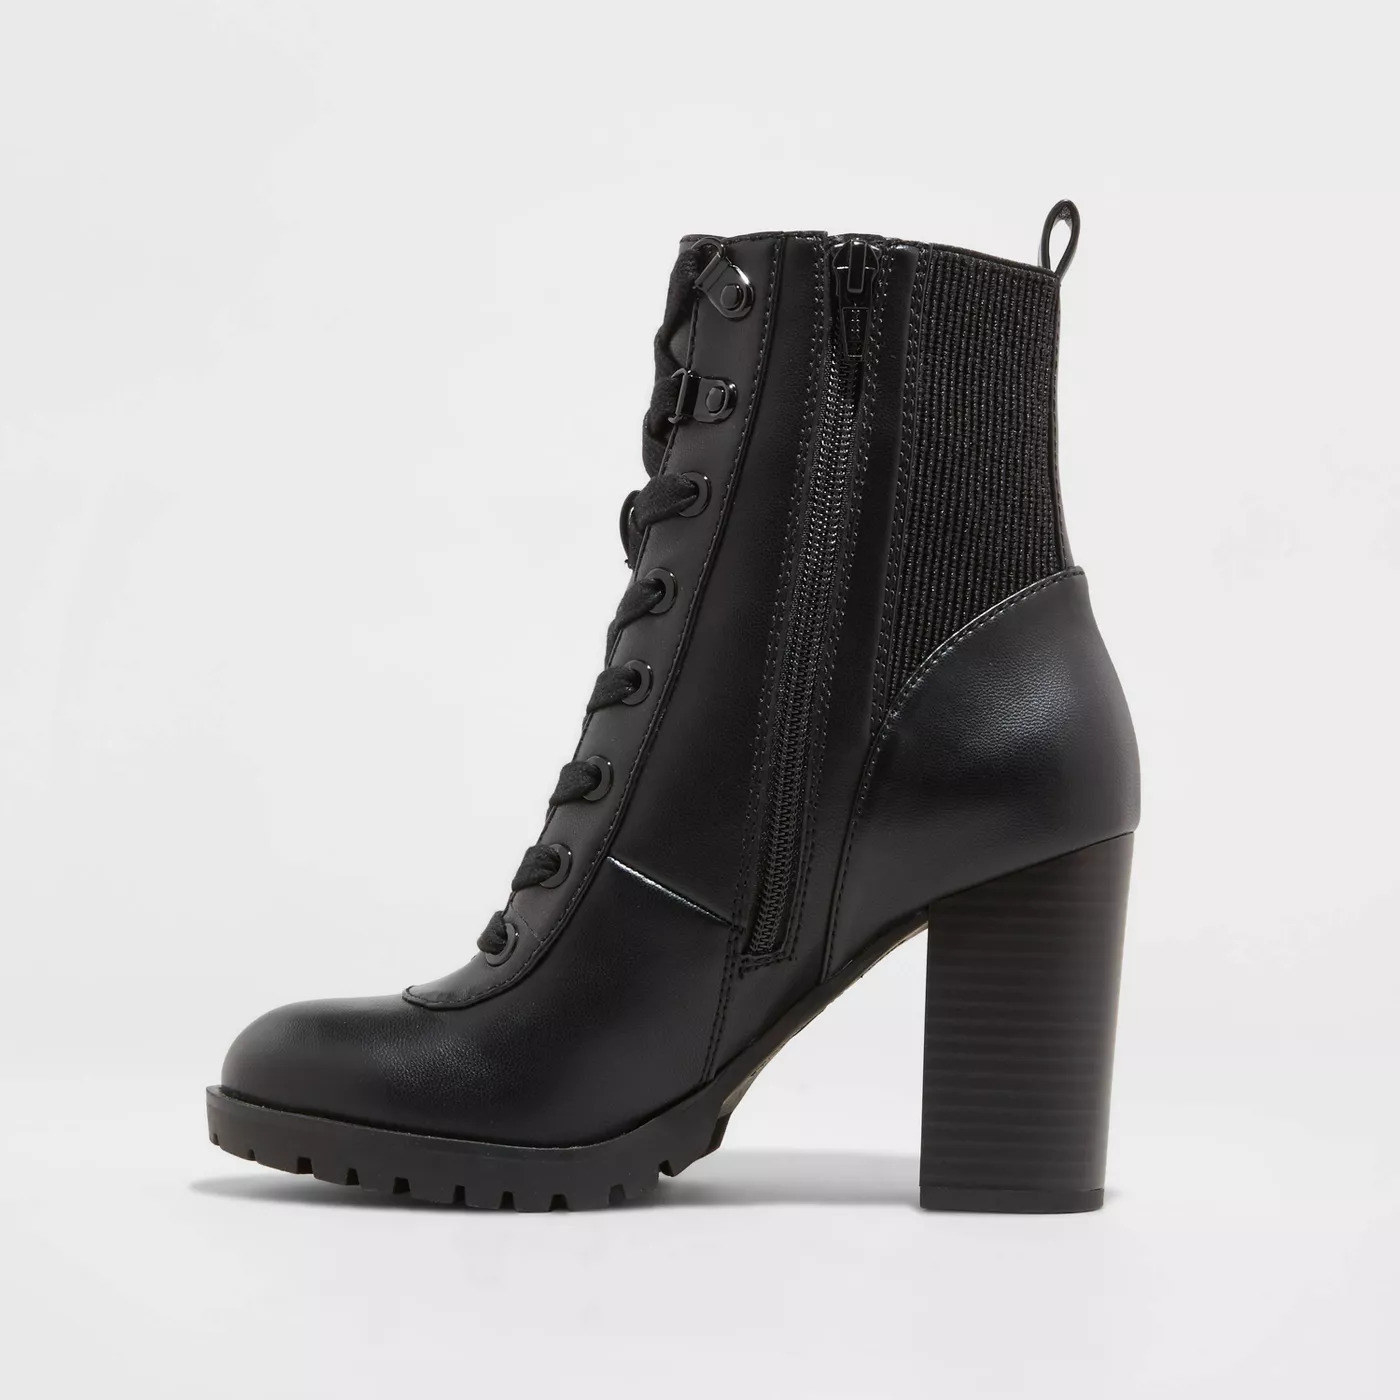 A black bootie with laces in the front, a zipper on the side, and an elastic backing for to provide ease while putting them on.